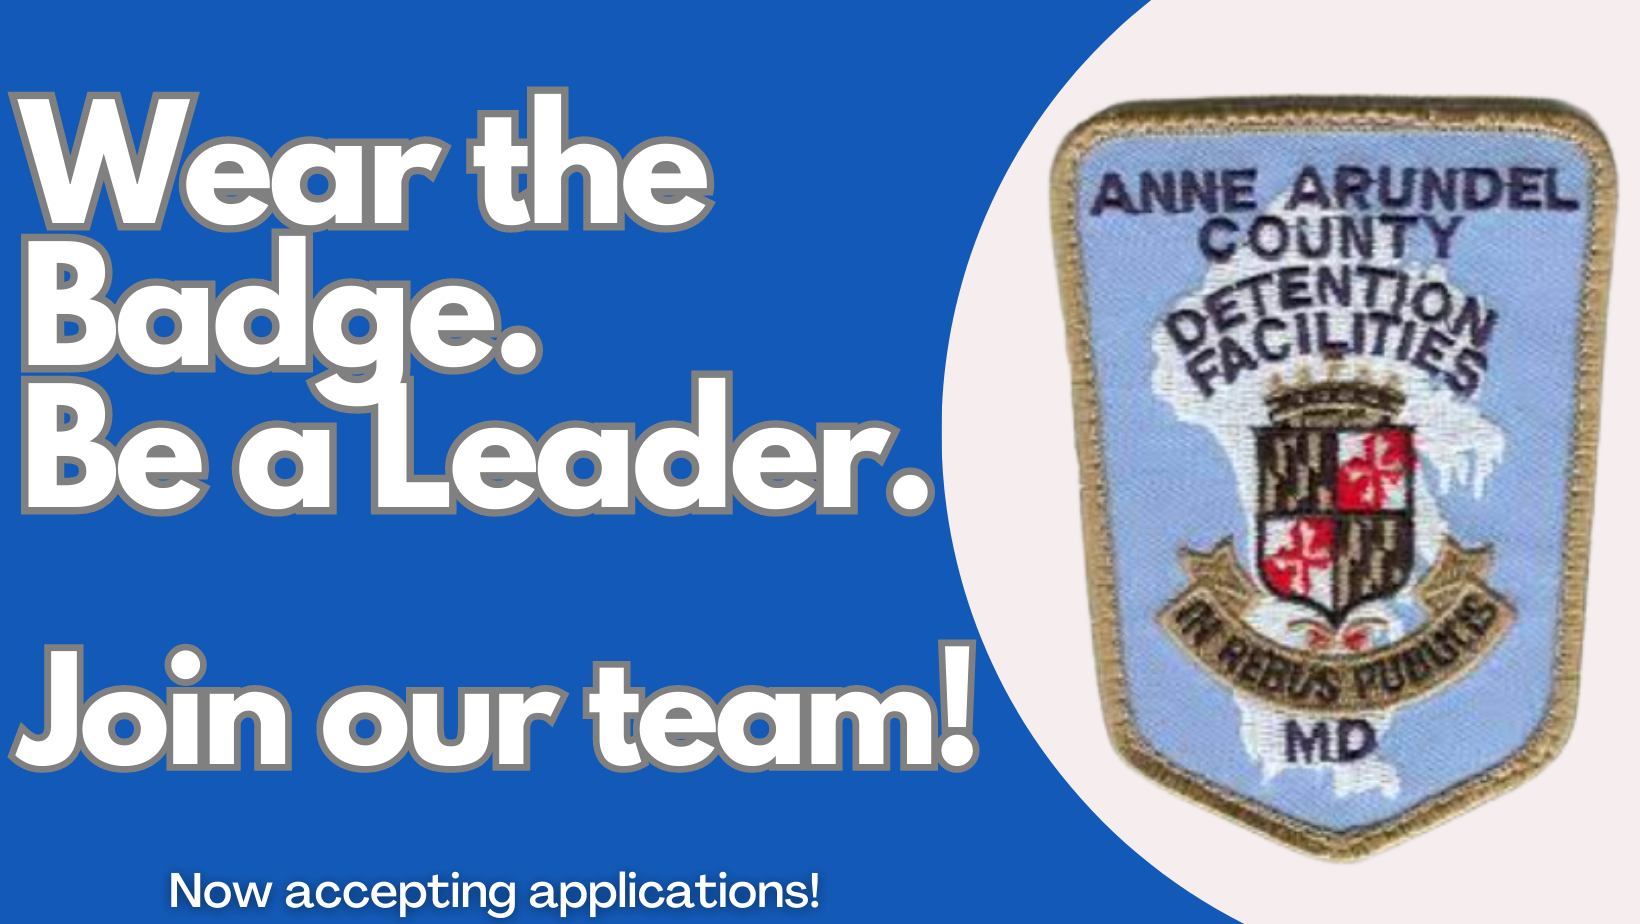 Wear the badge. Be a leader. Join our team!